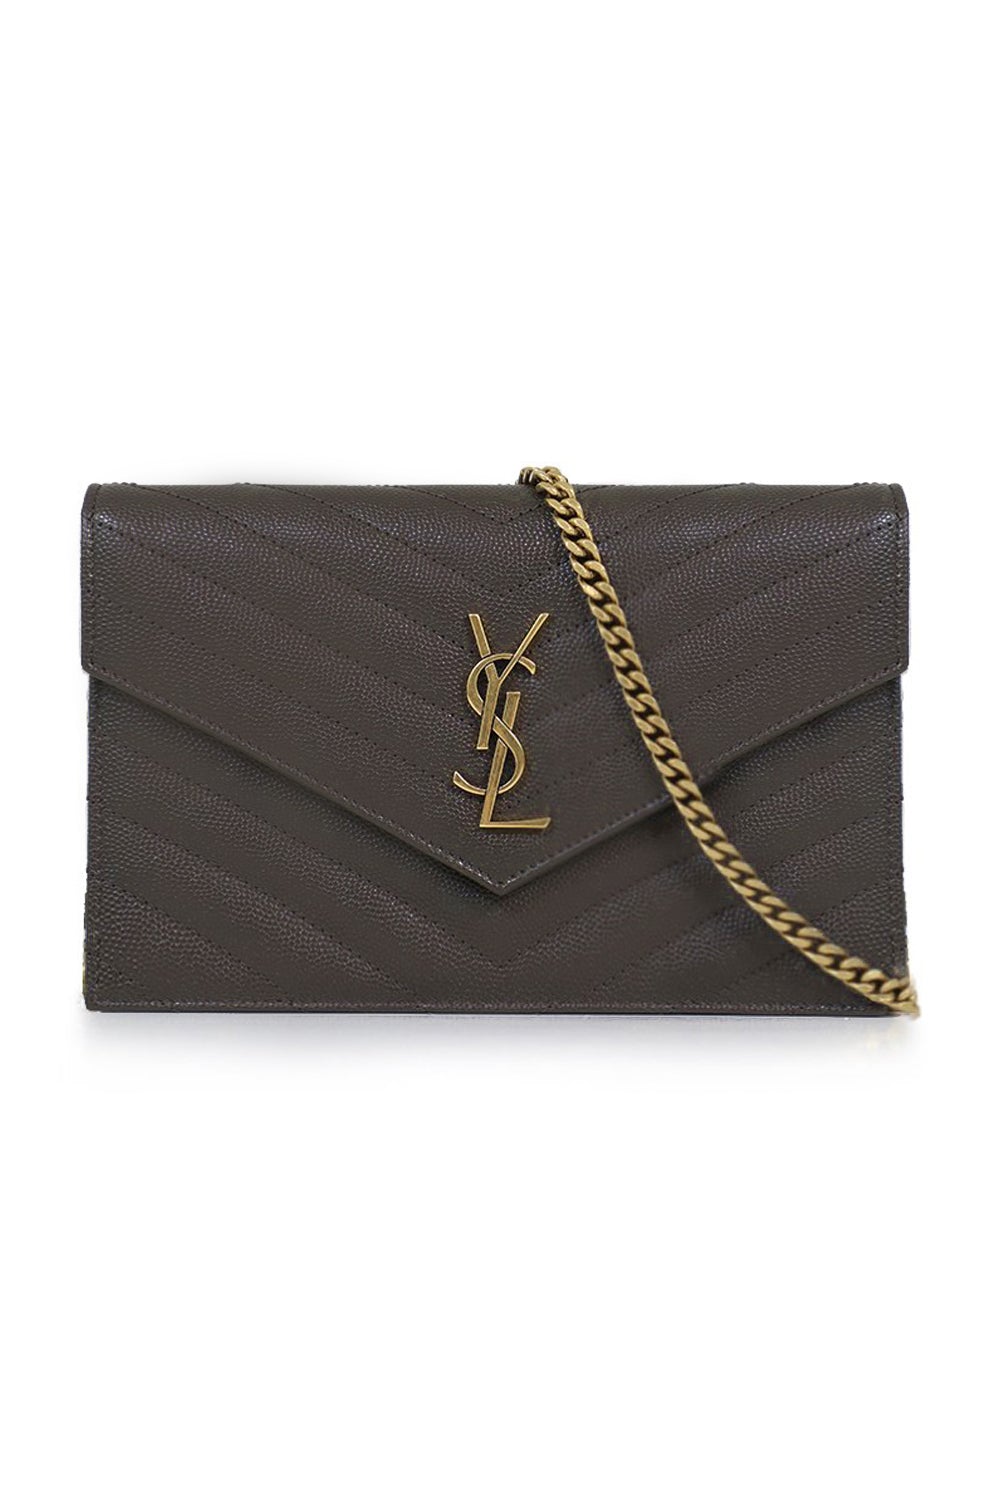 SAINT LAURENT BAGS BROWN SMALL MONOGRAMME QUILTED CHAIN WALLET | PEBBLE/GOLD